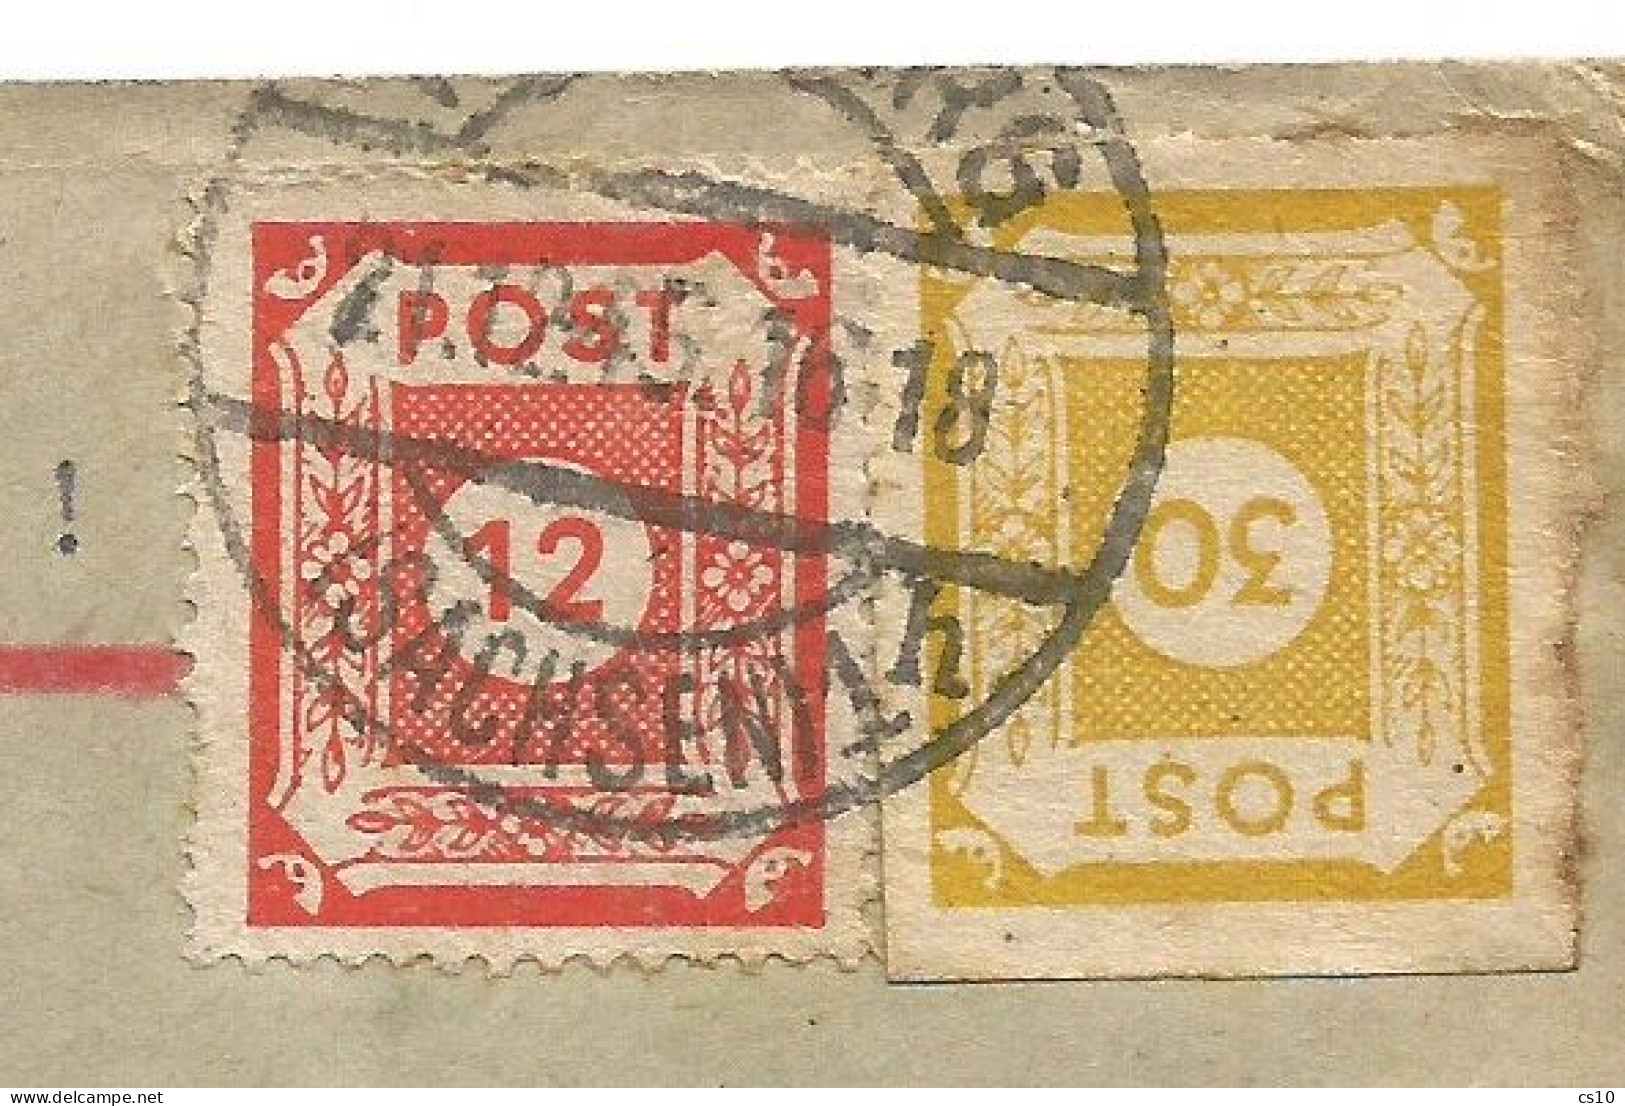 Germany Soviet Zone Dresden Registered CV Freiberg 21dec1945 To Hagen With Pf.12 Perf + Pf.30 IMPERFORATED - Covers & Documents